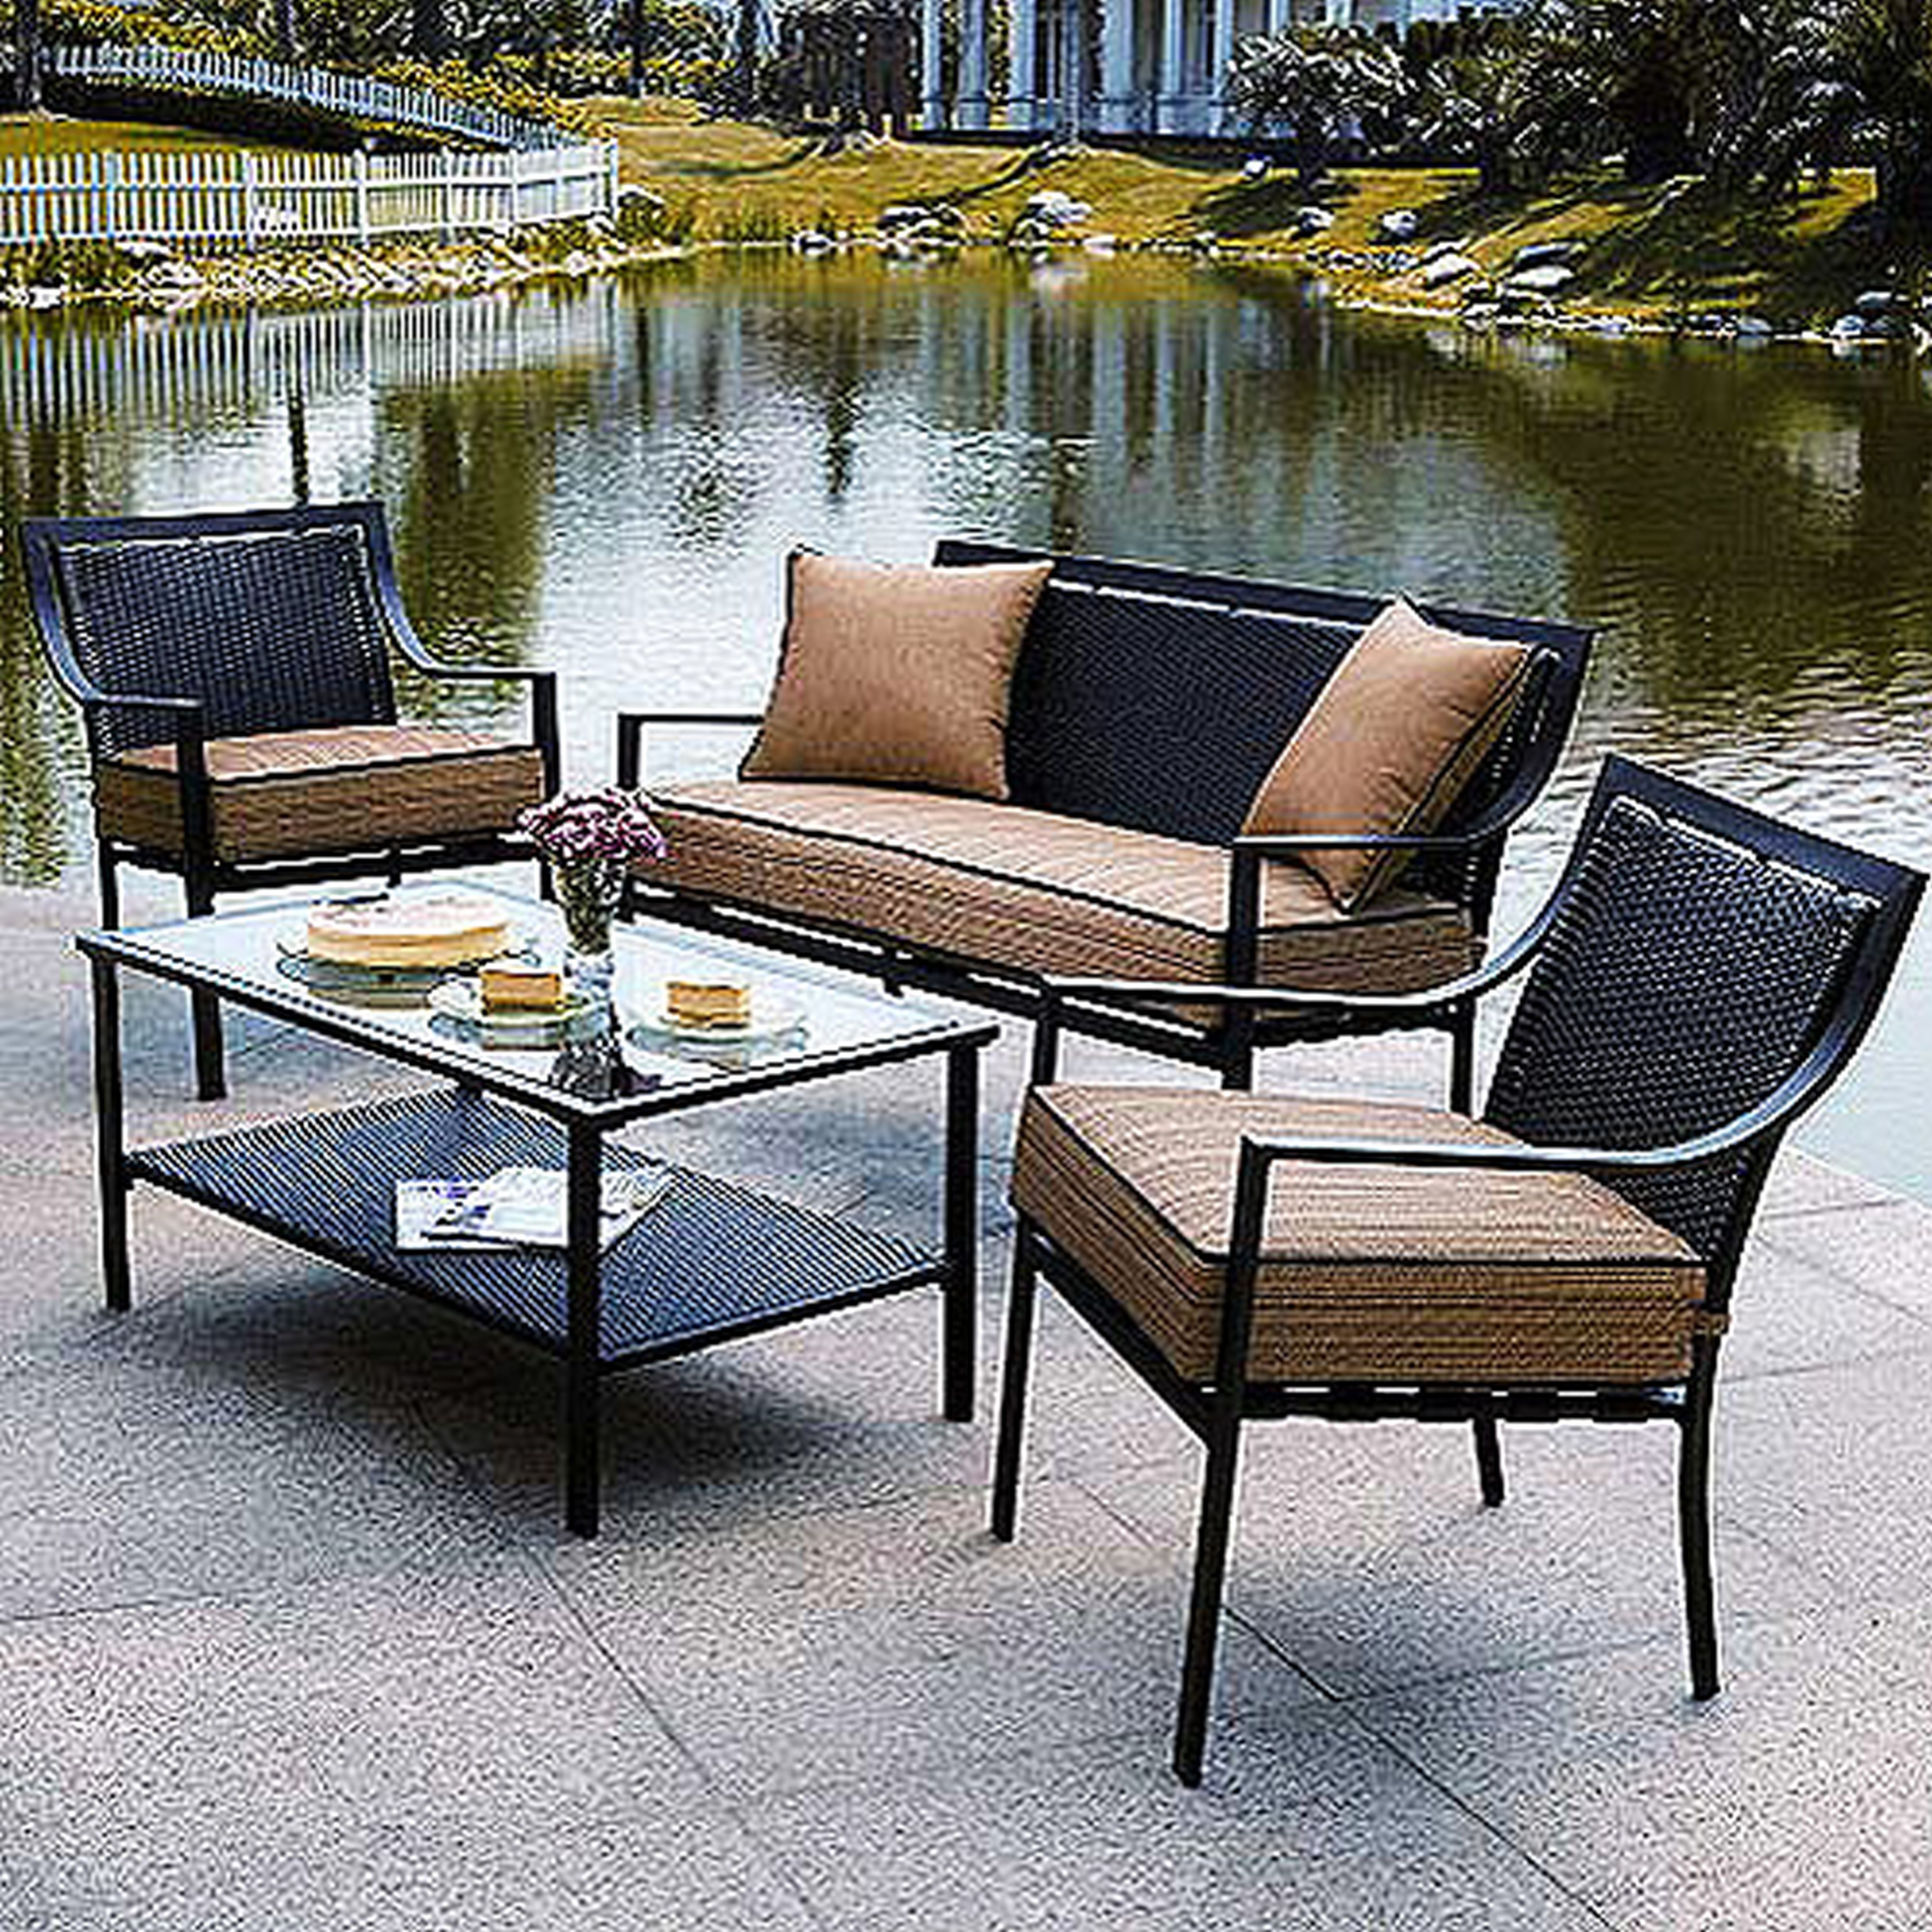 Outdoor Side Table Clearance - Grottepastenaecollepardo : Grottepastenaecollepardo